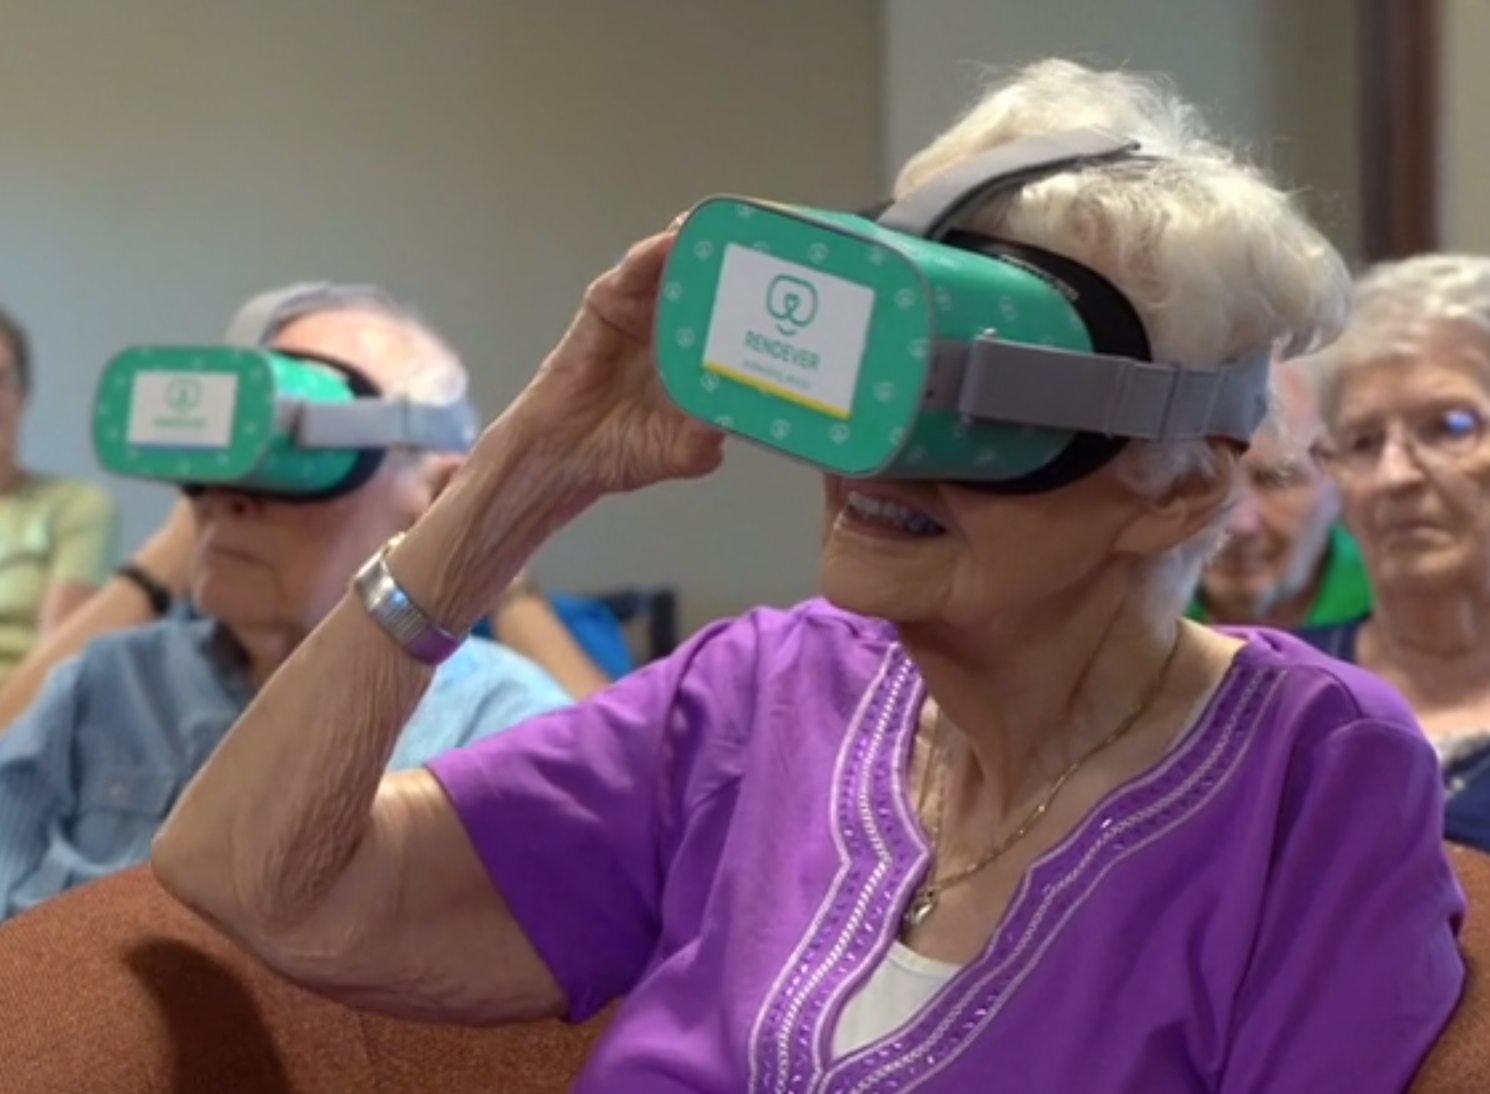 Rendever Awarded $2M NIH Grant to Research Impact of Virtual Reality on Aging Population